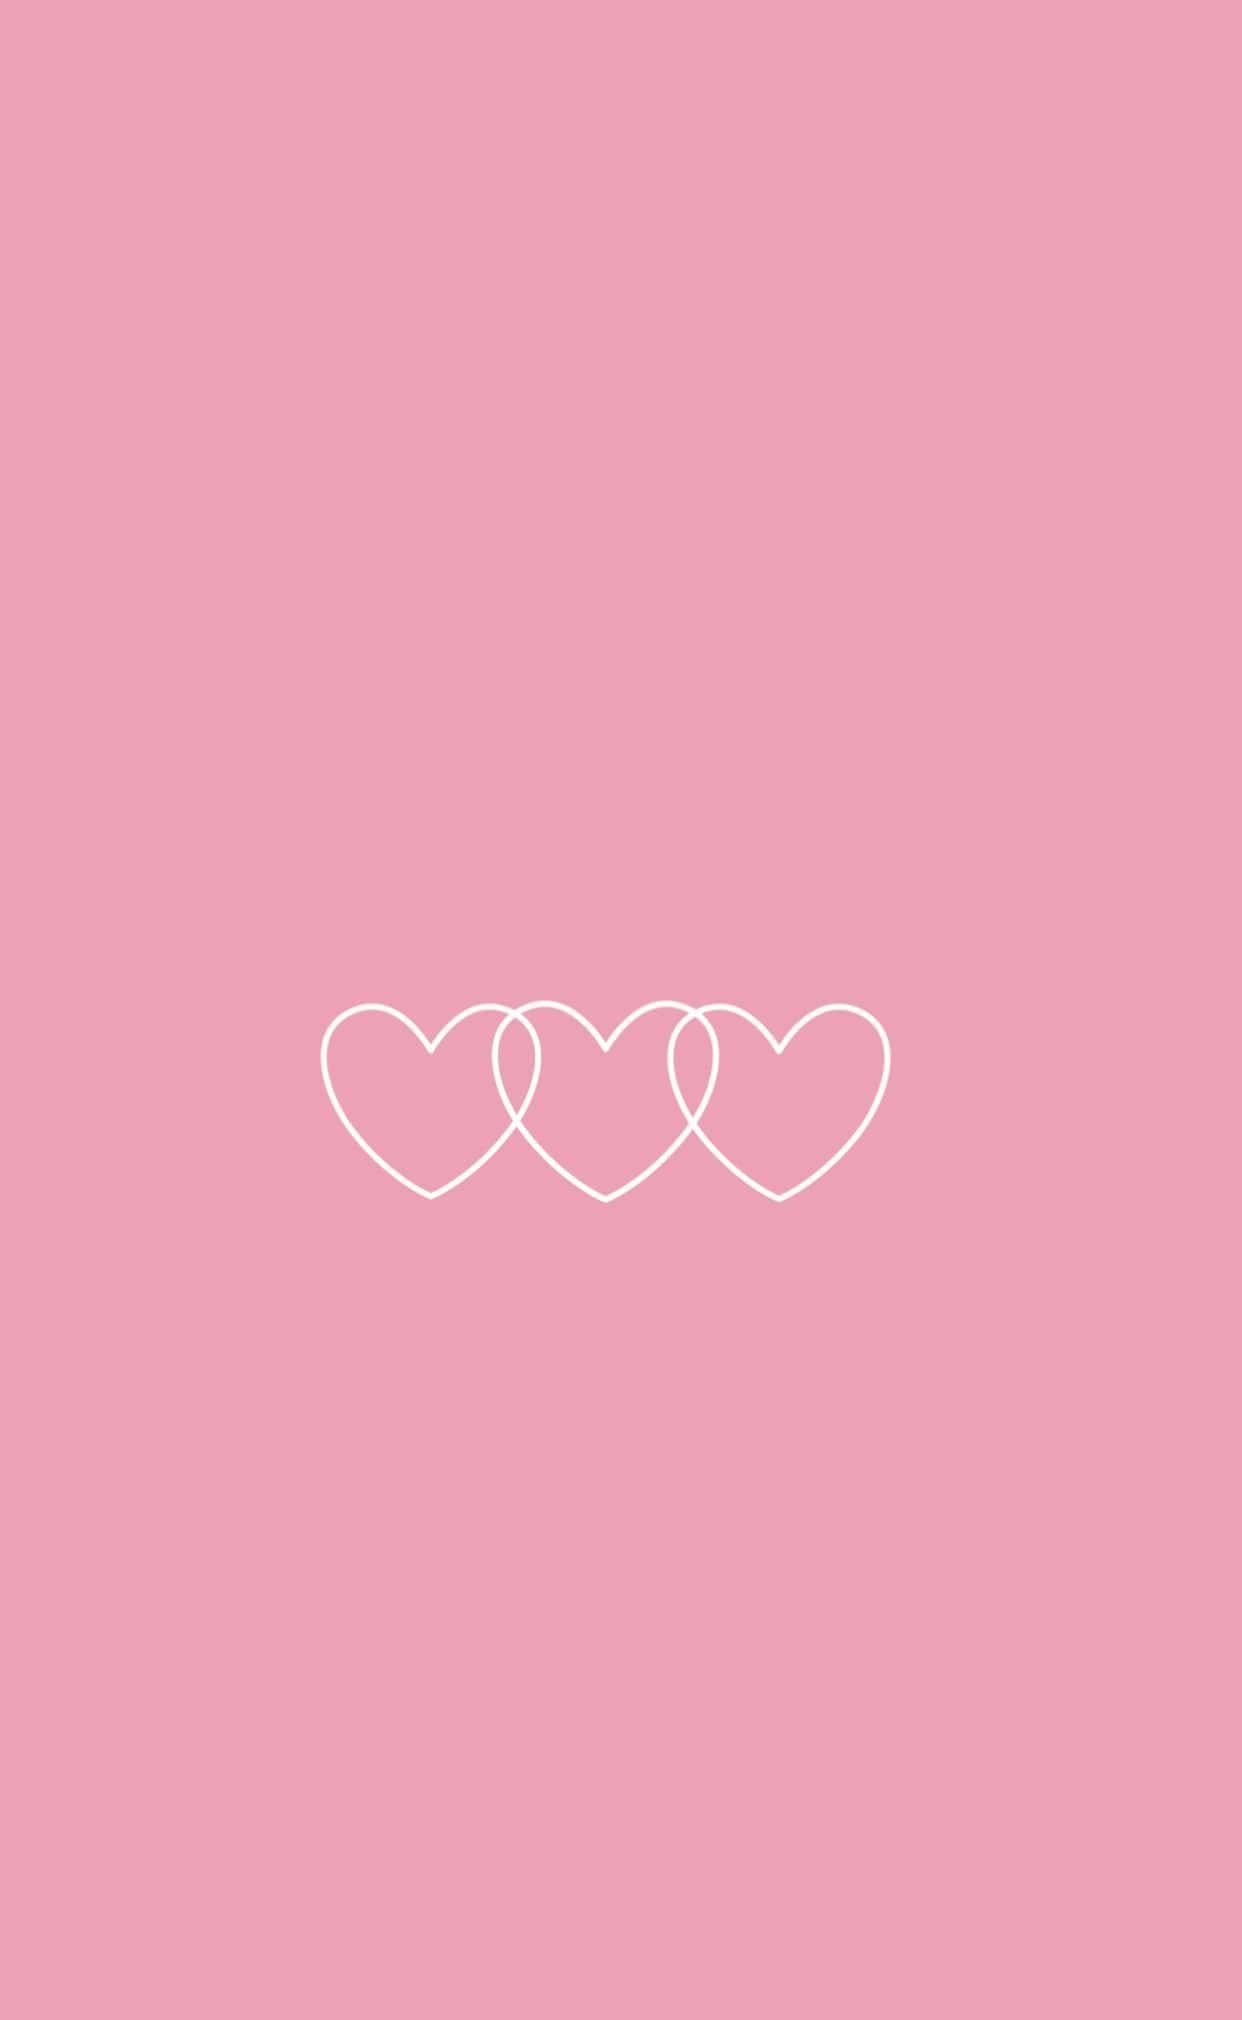 A simple image of three hearts on a pink background - Pink heart